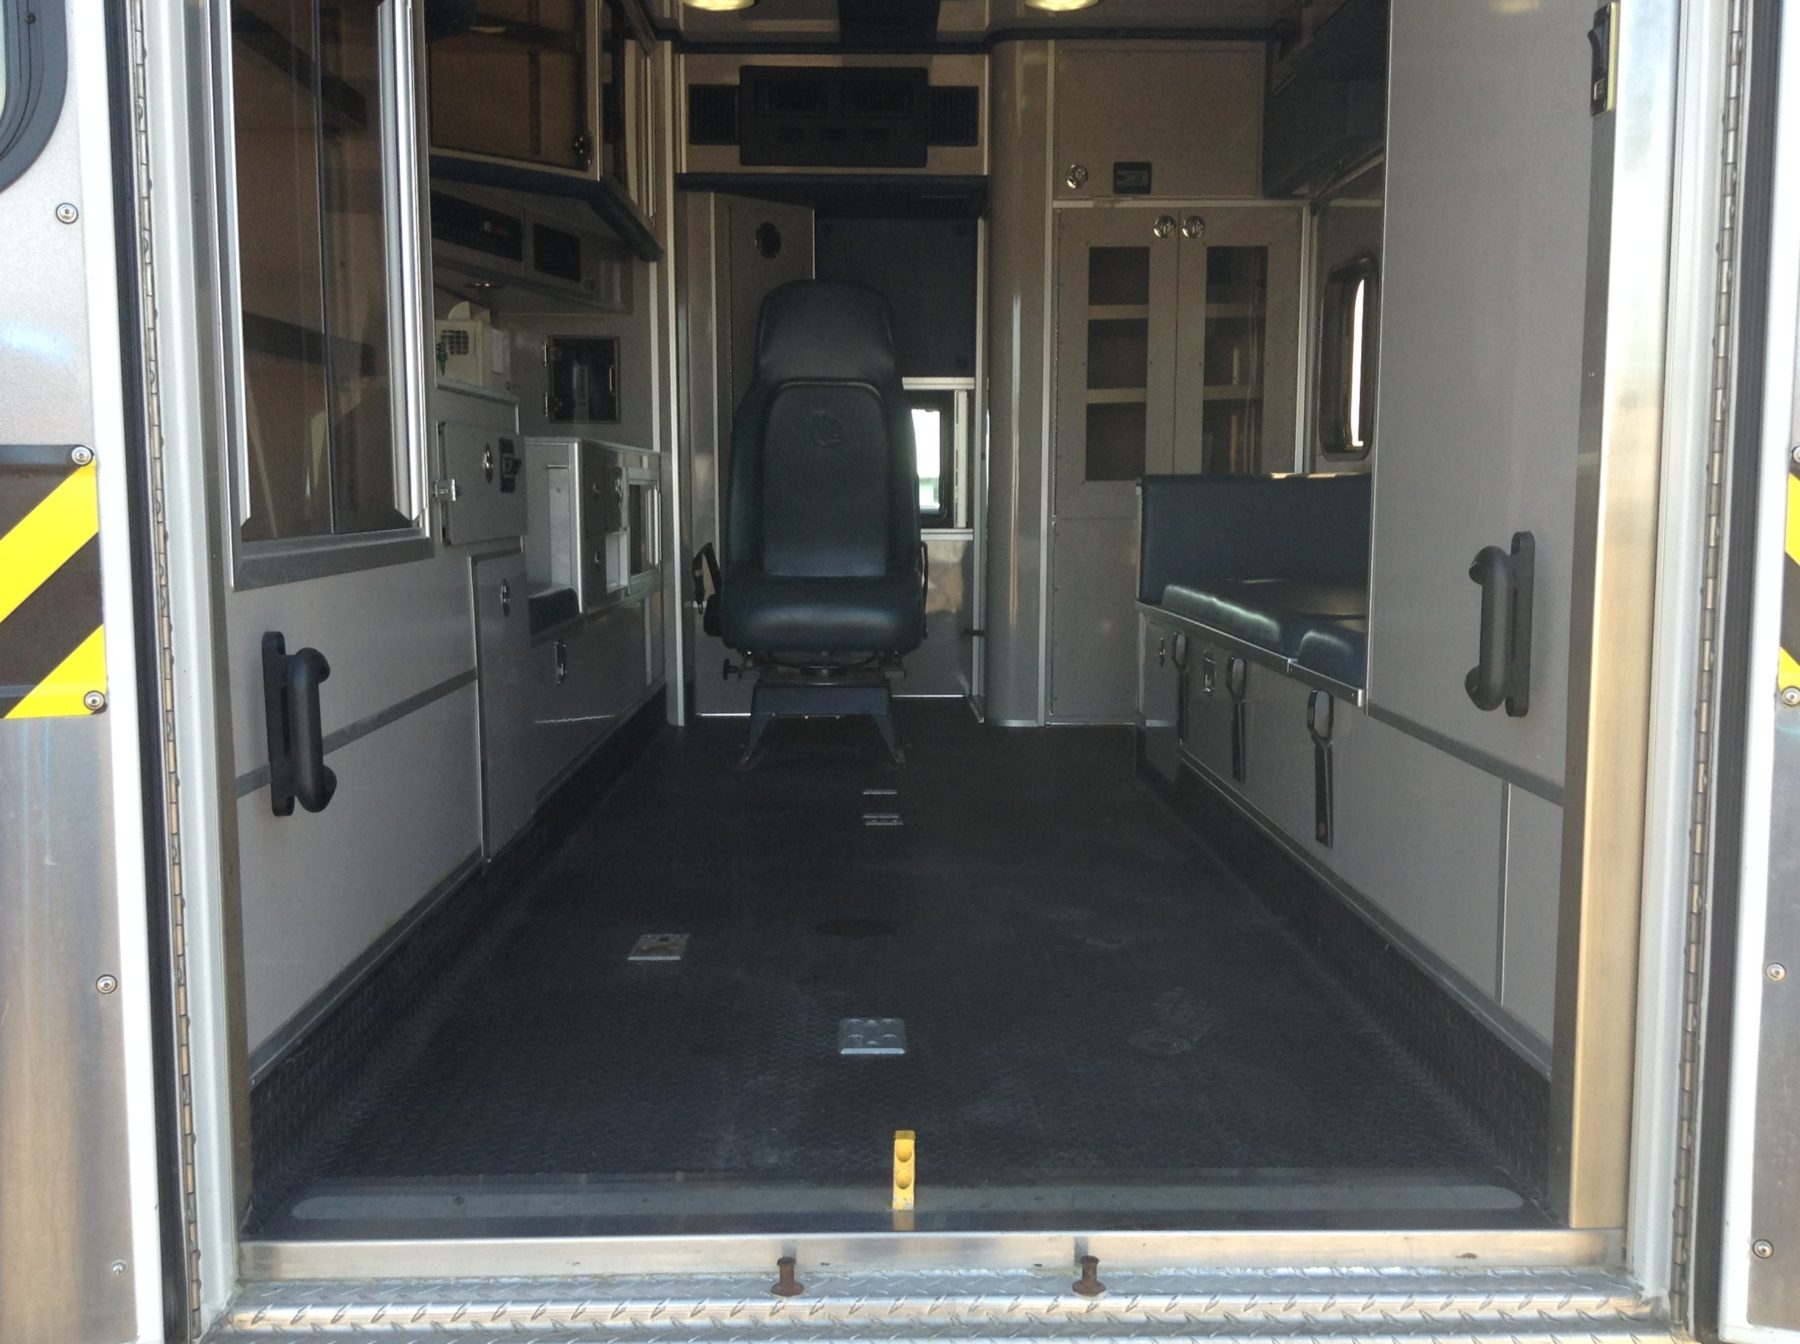 2011 Ford F450 4x4 Heavy Duty Ambulance For Sale – Picture 3